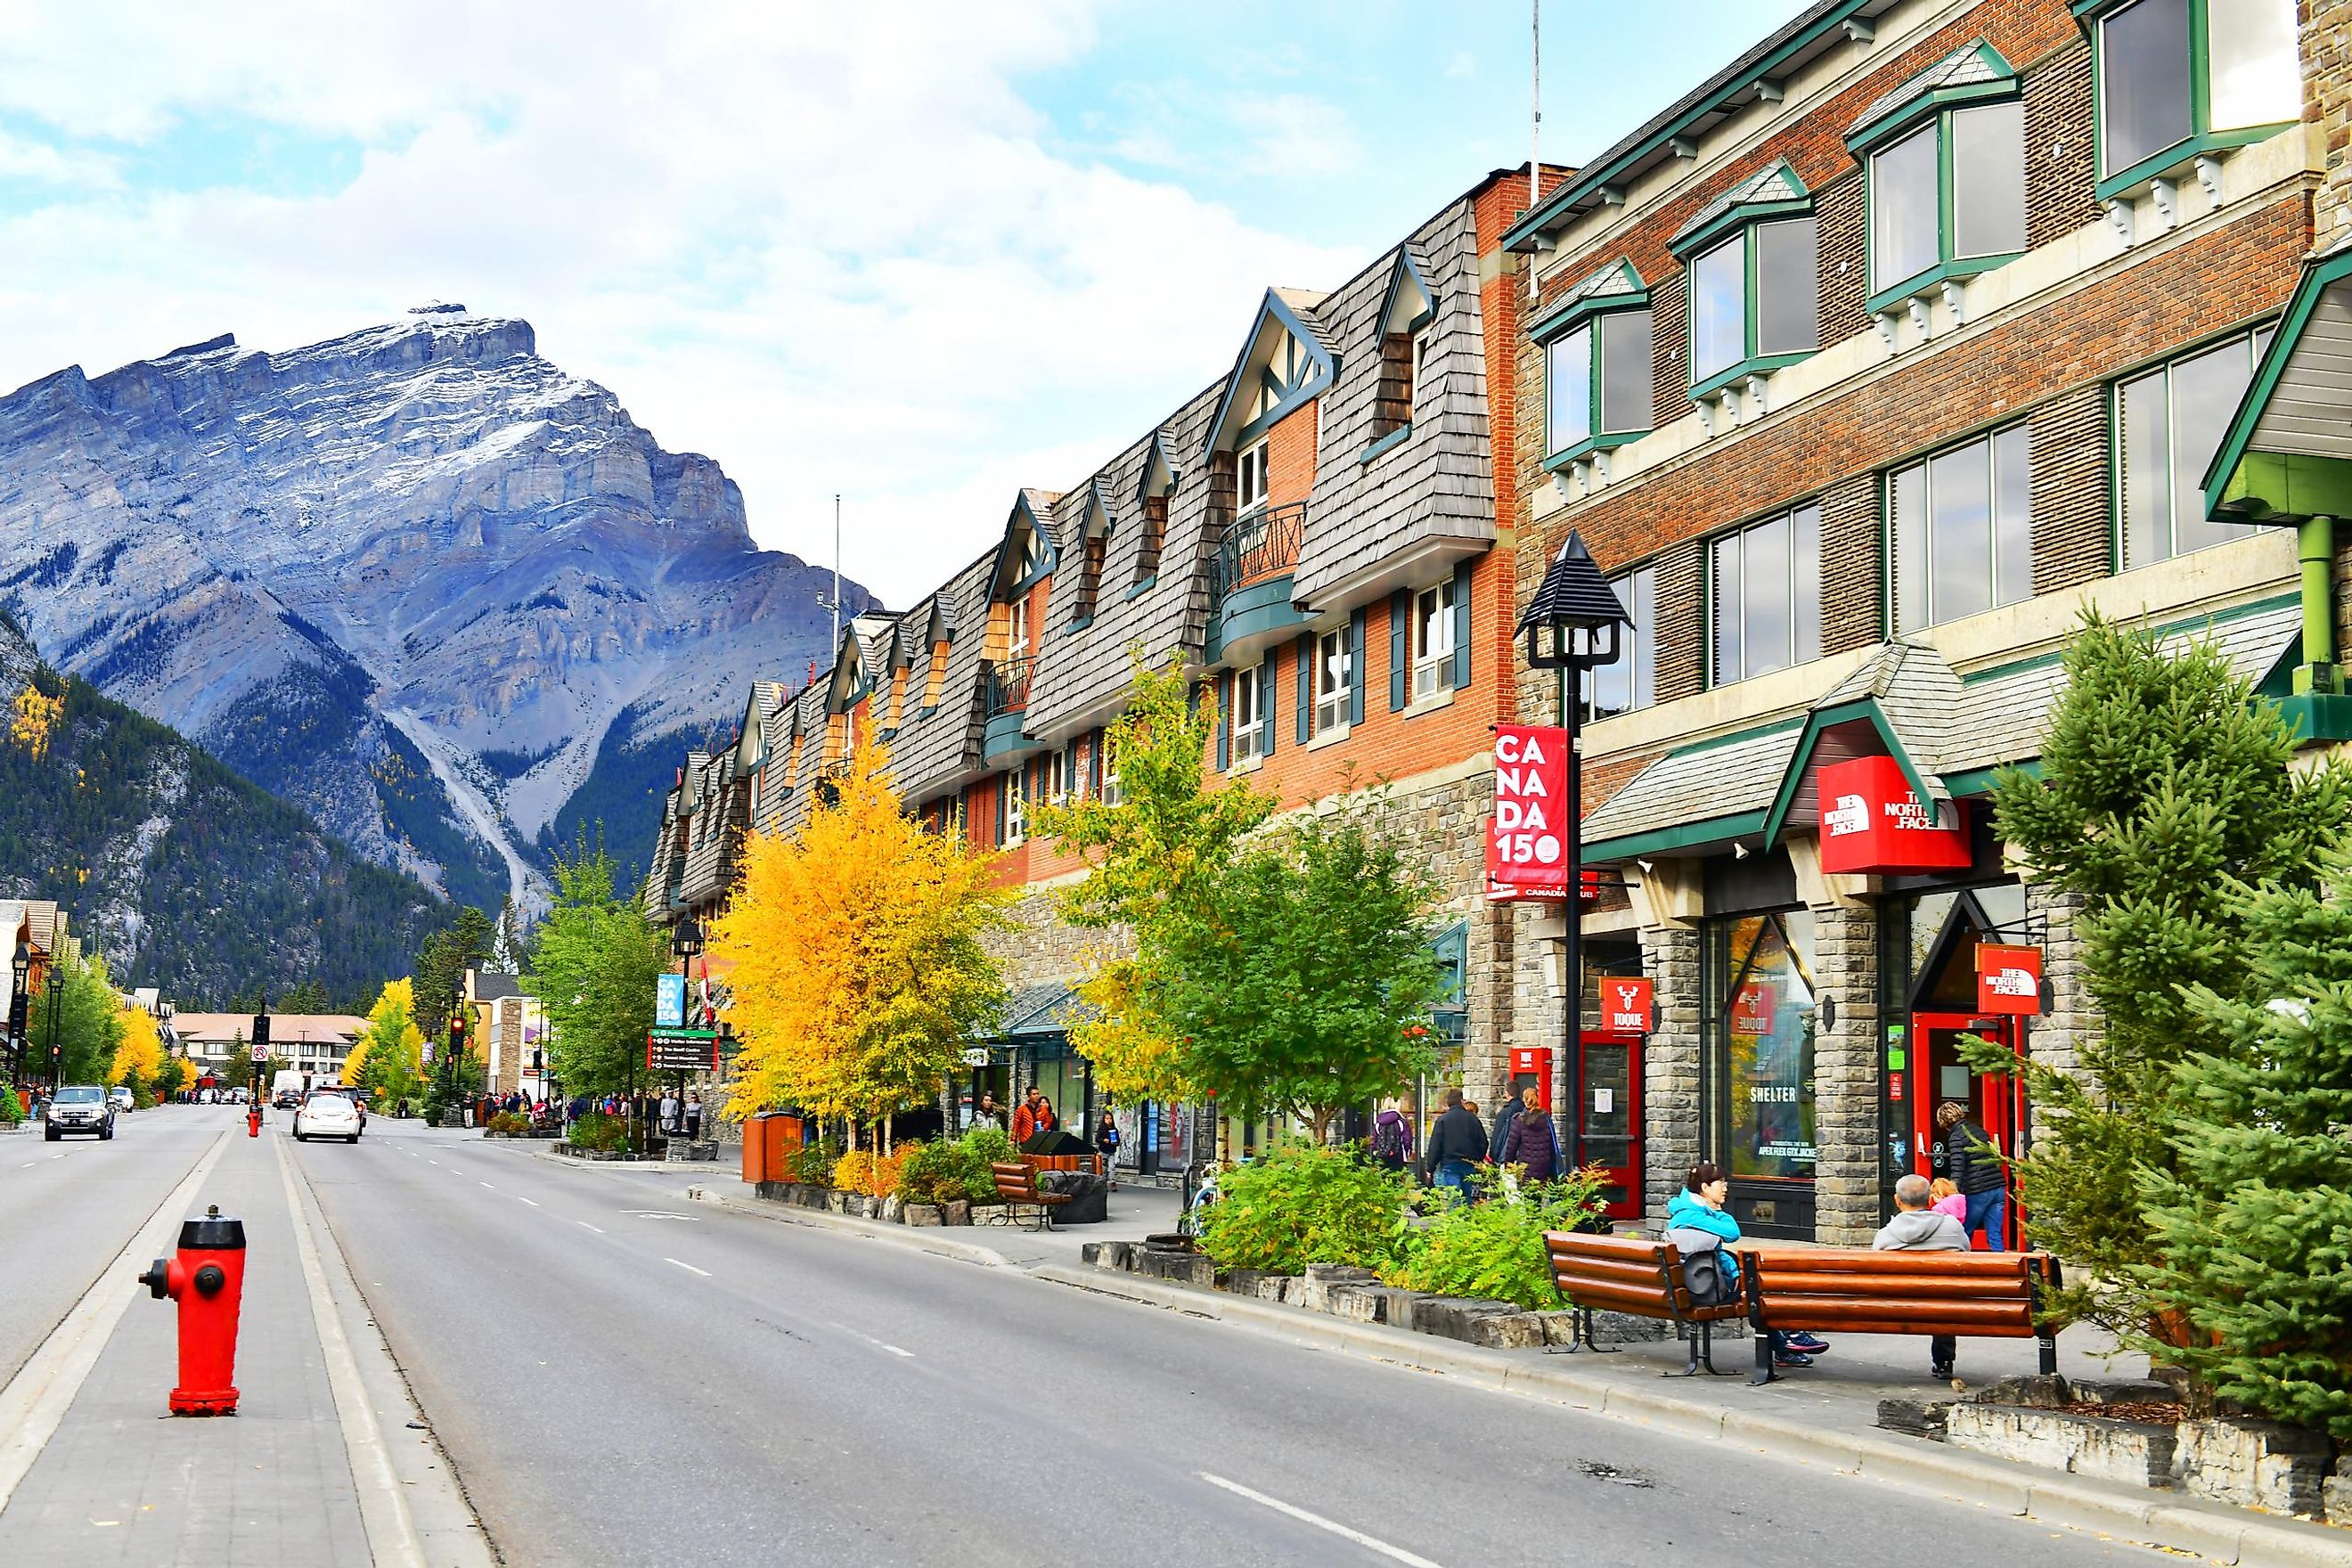 Street view of famous Banff Avenue in Banff National Park